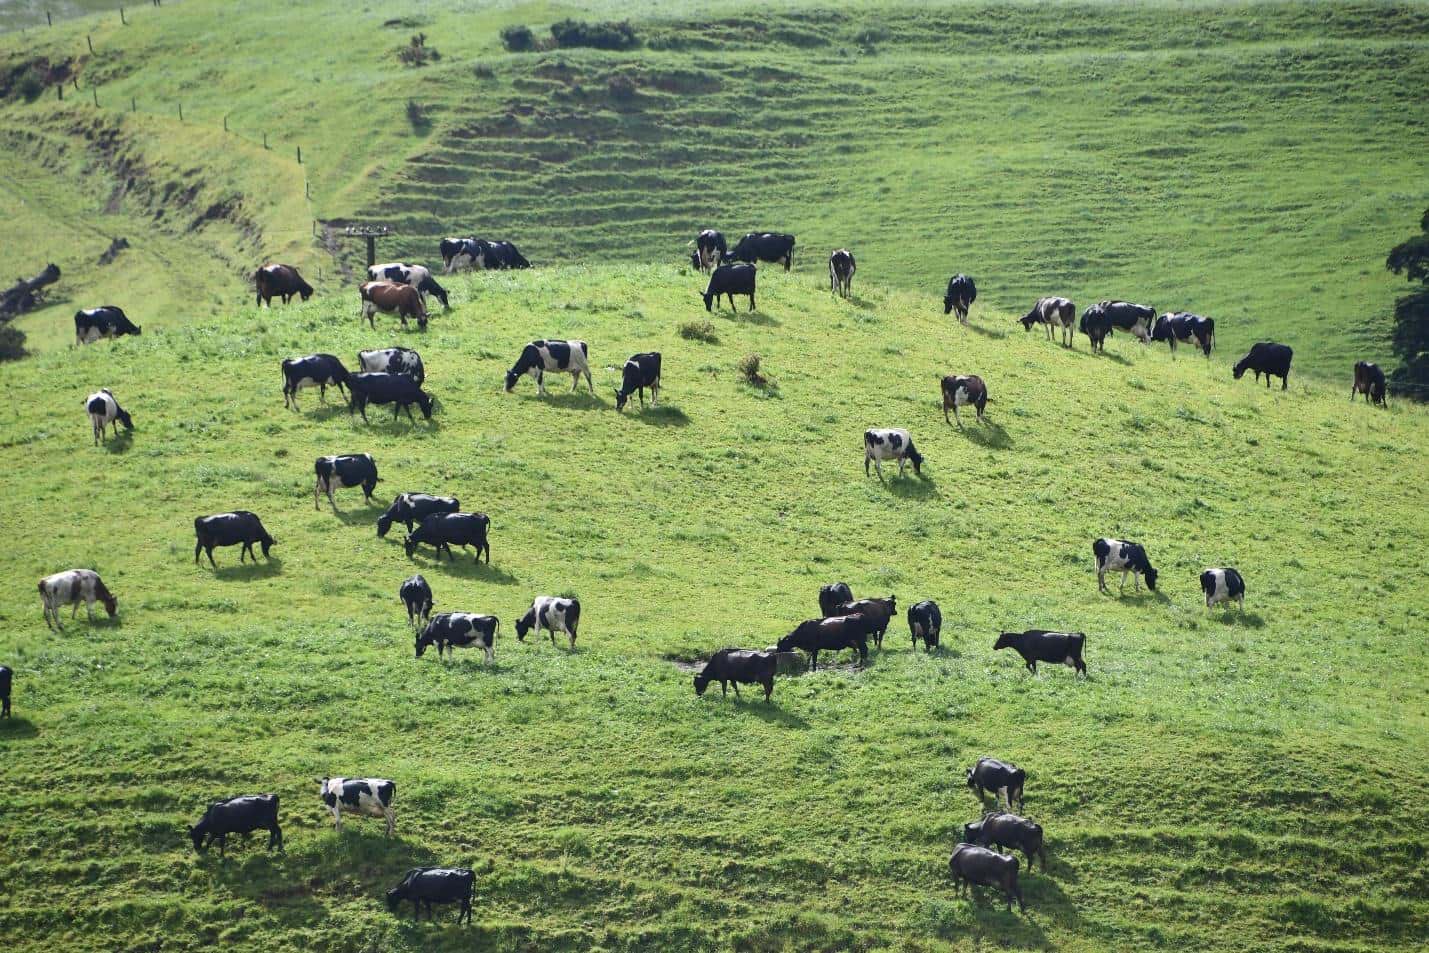 Stocking rate is the number of animals grazing on a given amount of land at a specified time.